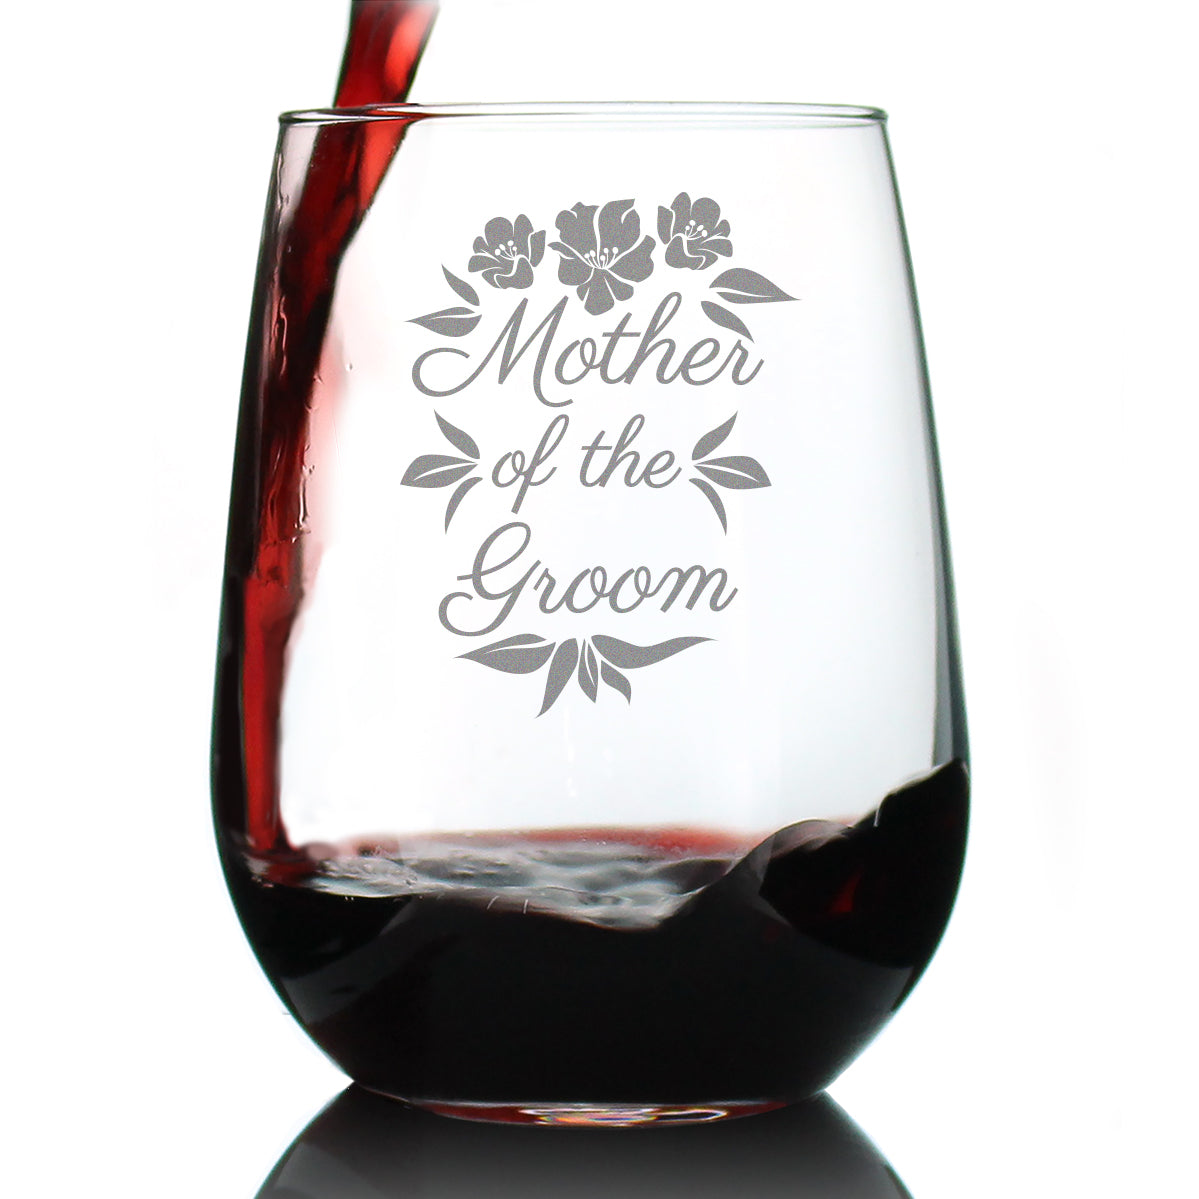 Mother of the Groom Stemless Wine Glass - Unique Wedding Gift for Soon to be Mother-in-Law - Cute Engraved Wedding Cup Gift